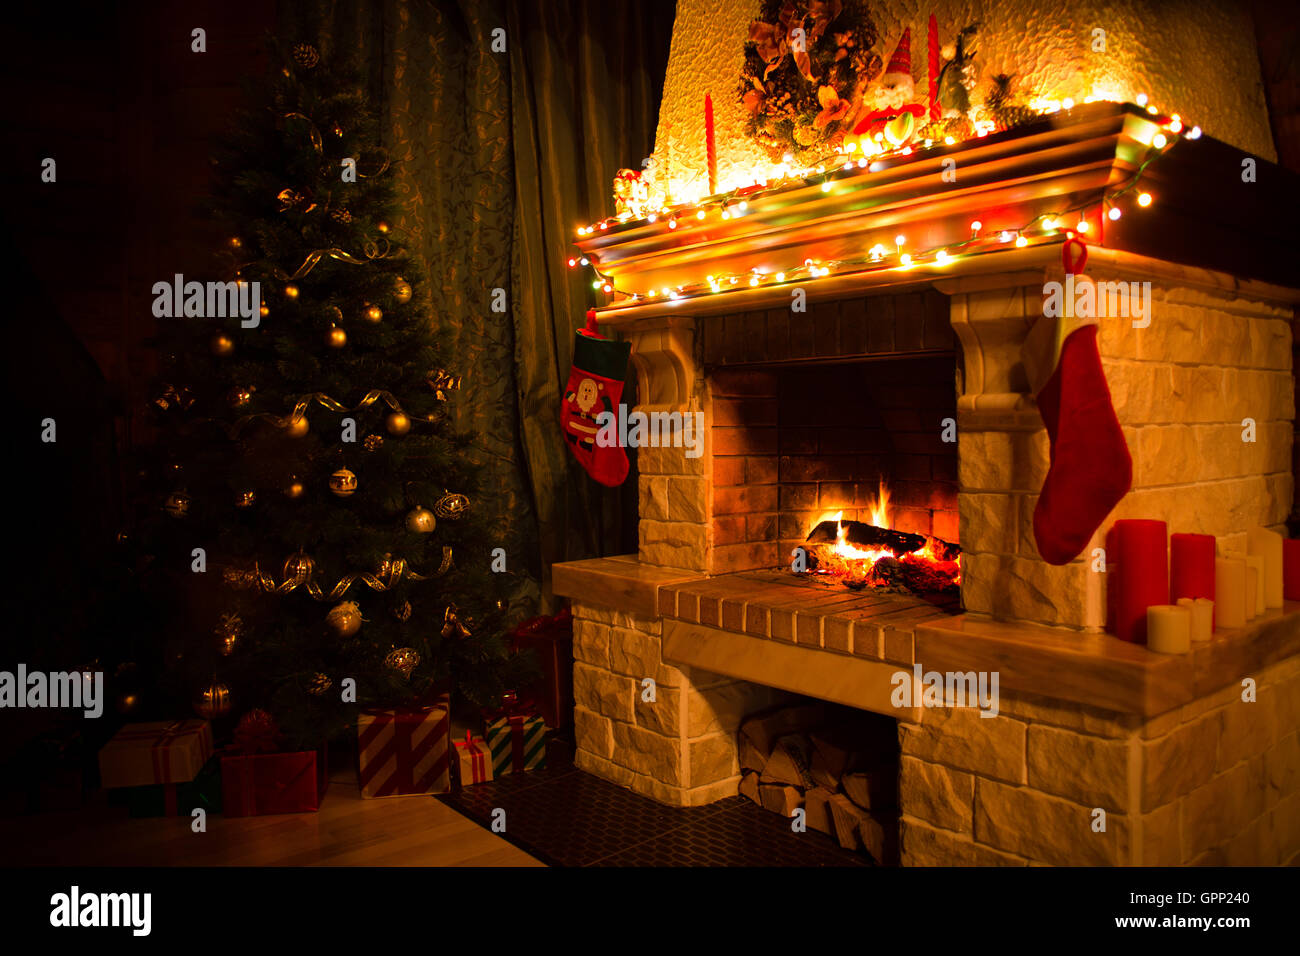 christmas interior with xmas tree, presents and fireplace Stock Photo